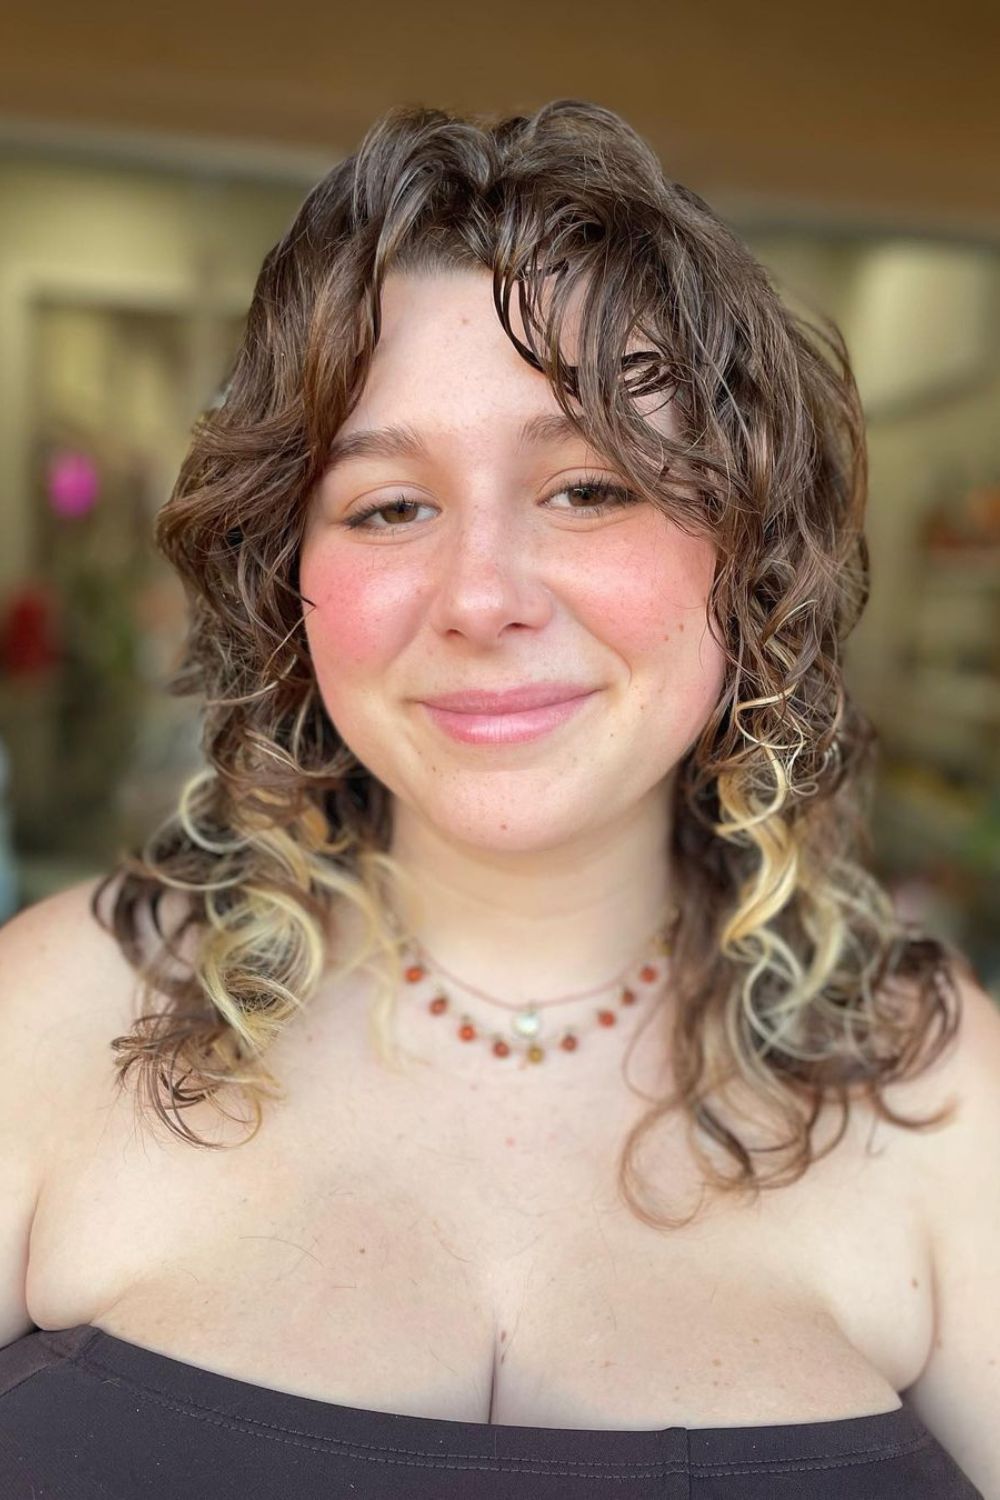 A woman with brown curly hair and curly curtain bangs.